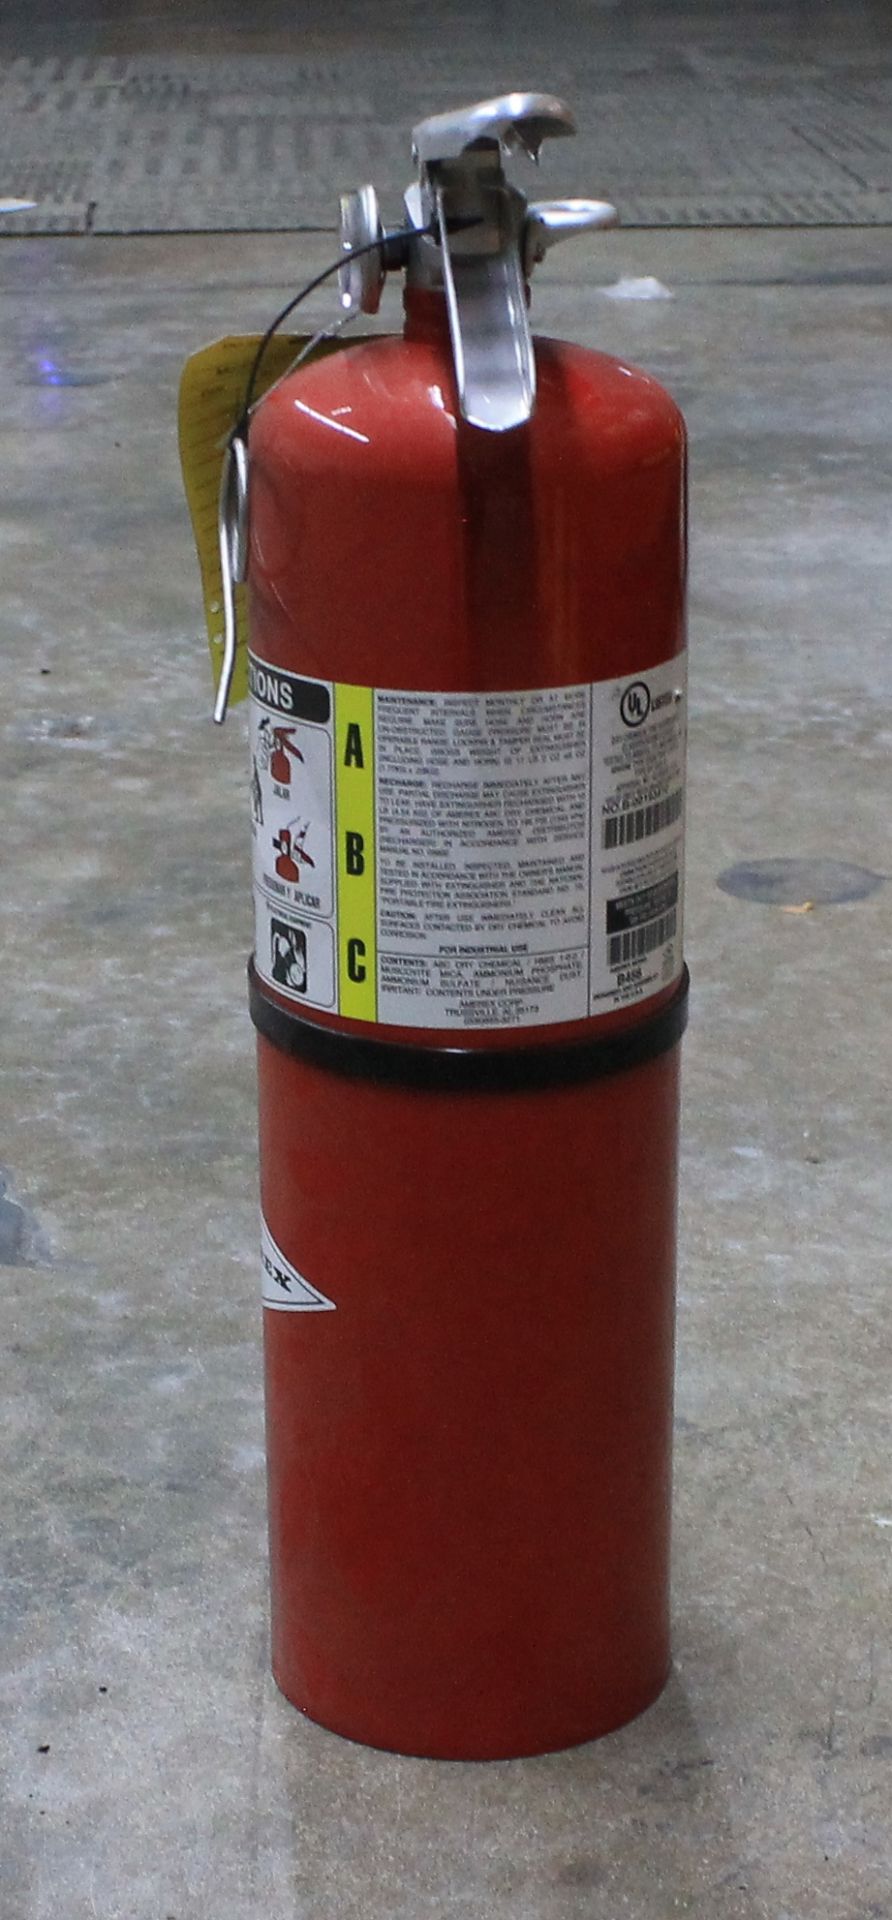 5 PCS OF FIRE EXTINGUISHER - CLASS ABC 10LB - Image 2 of 3